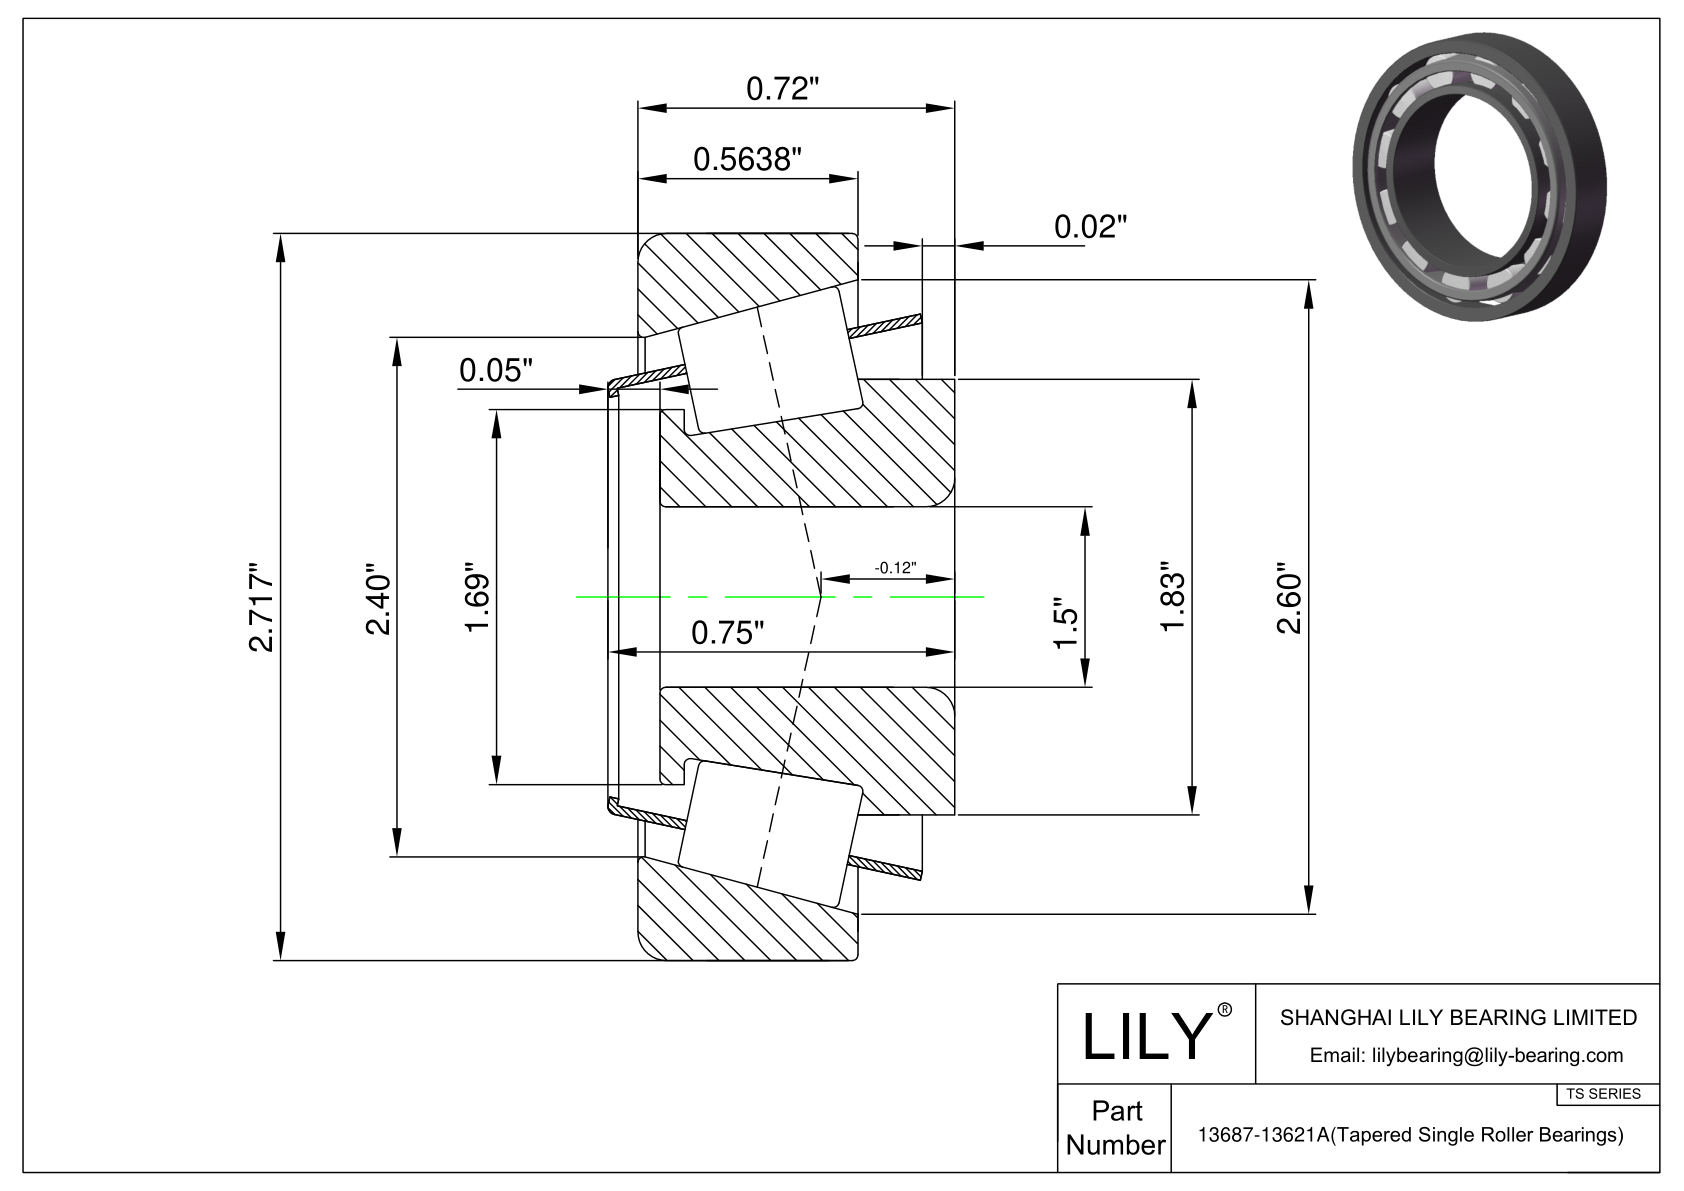 13687-13621A TS (Tapered Single Roller Bearings) (Imperial) cad drawing